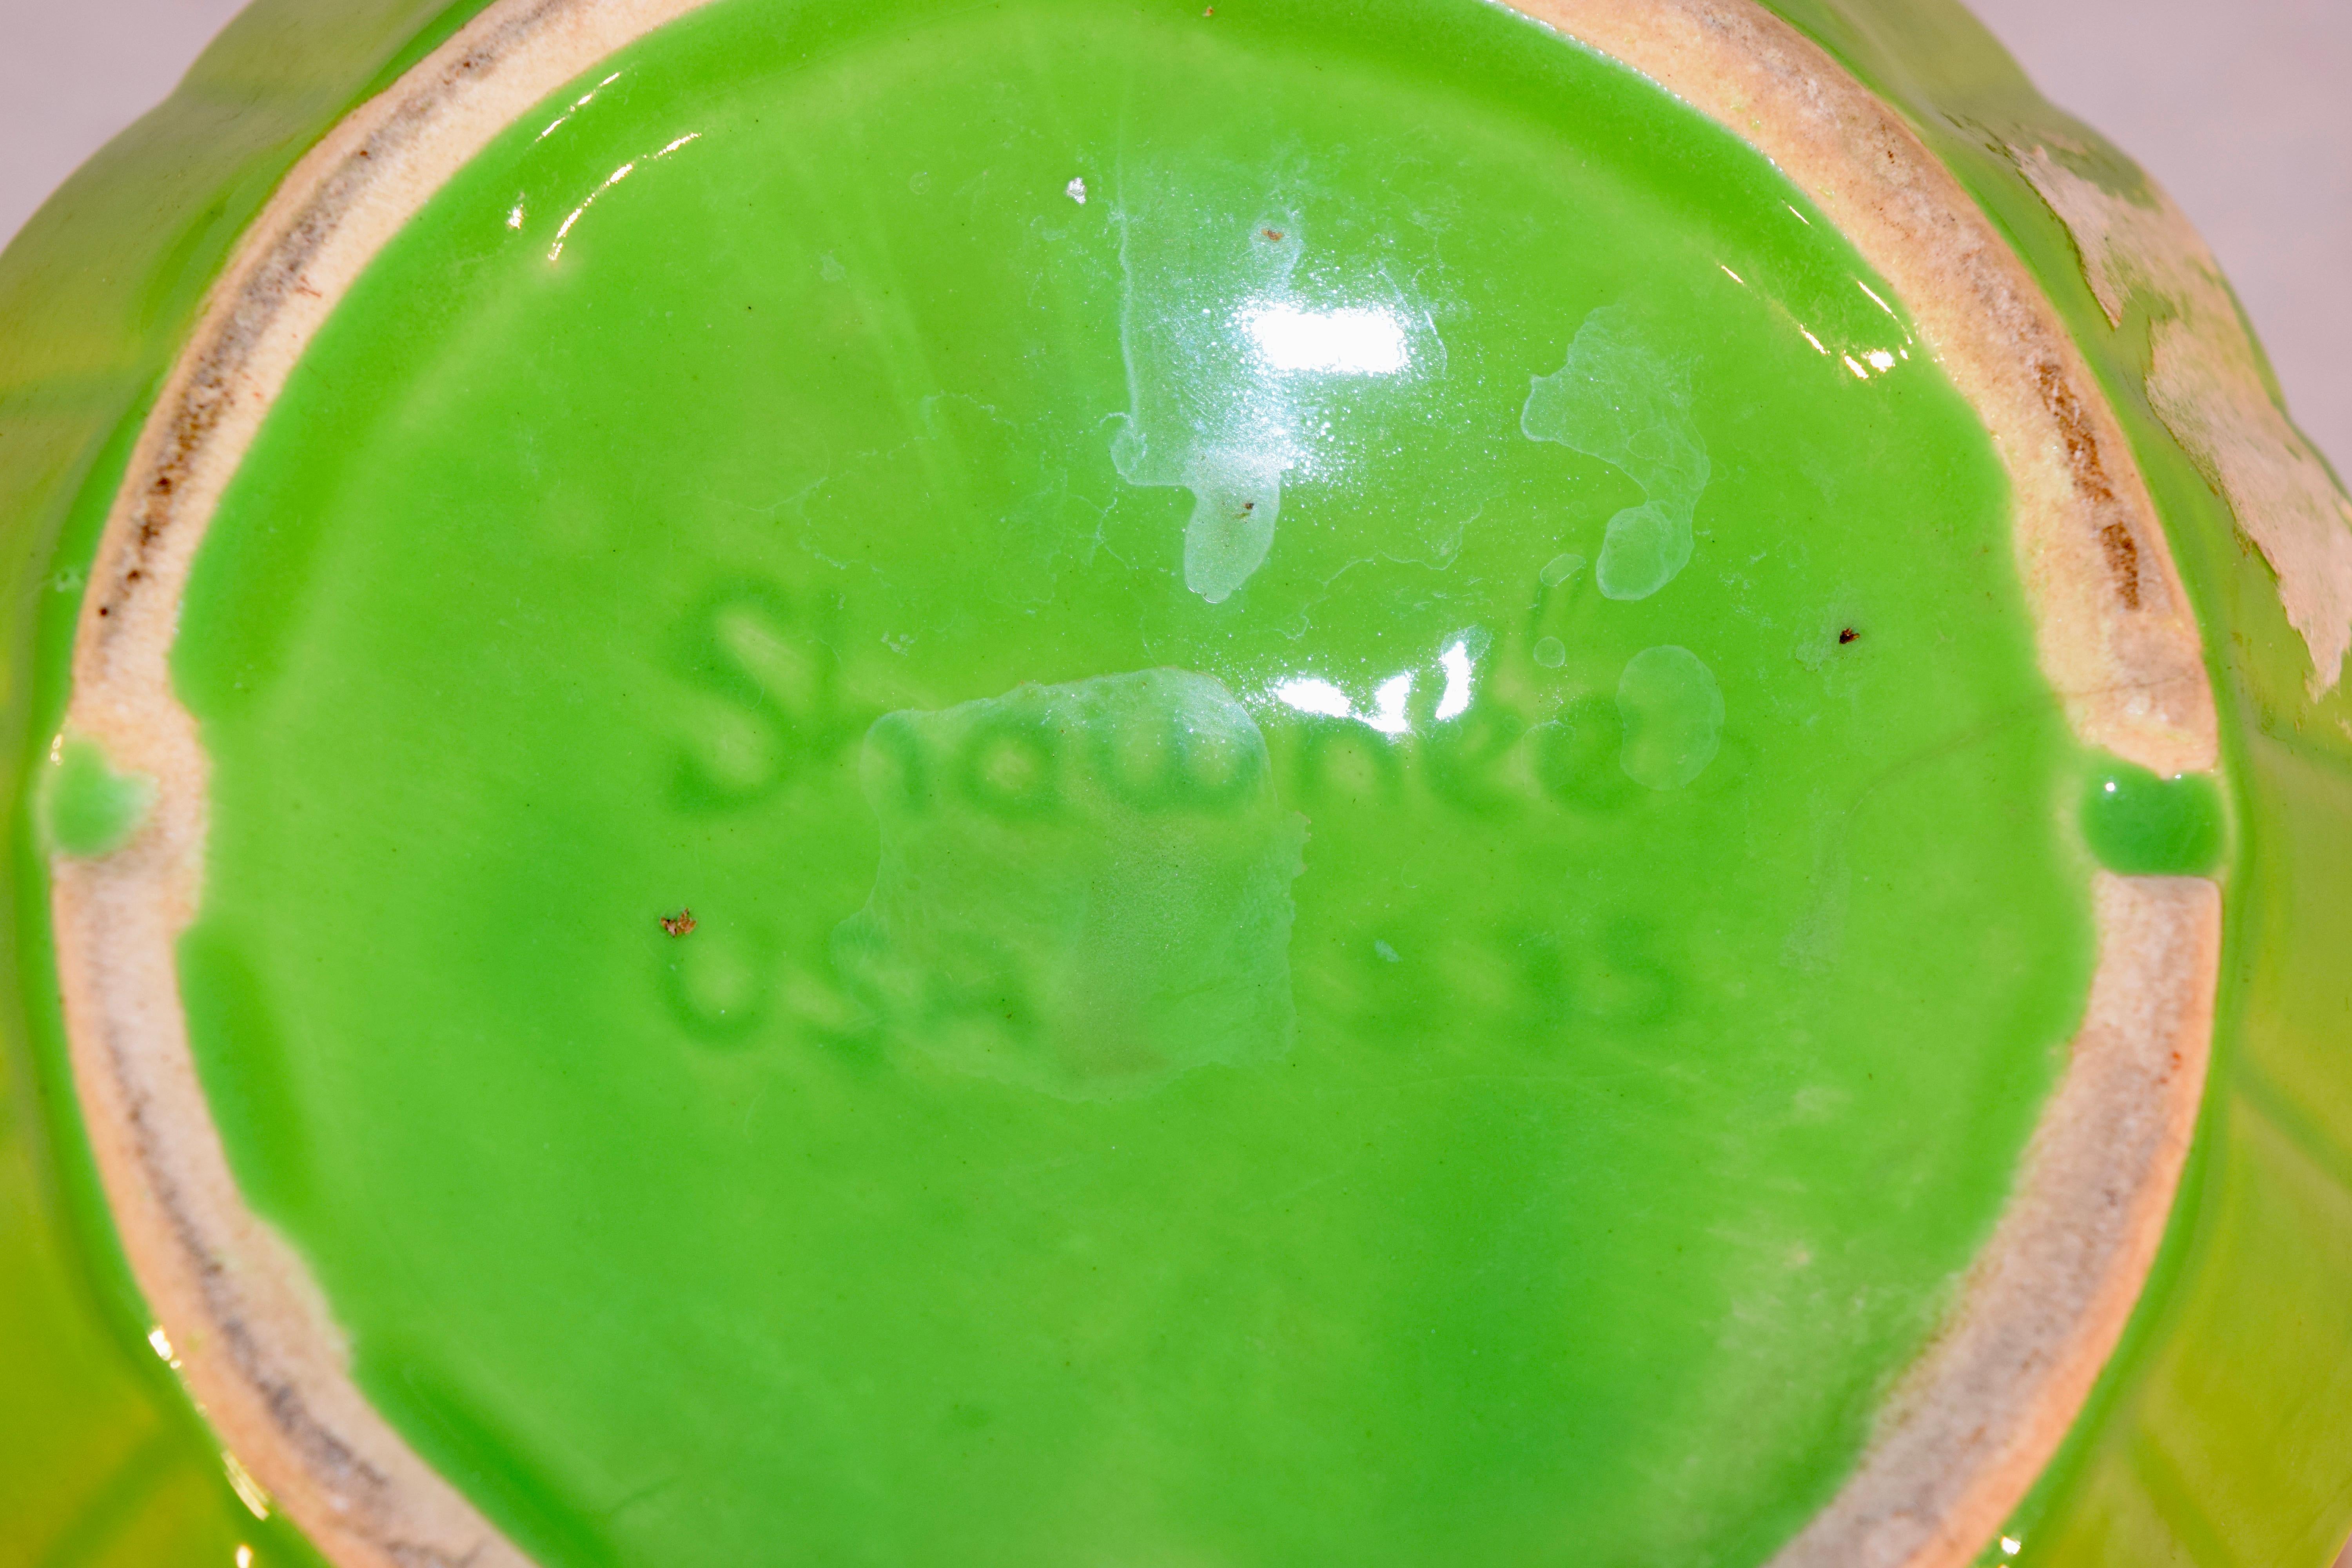 shawnee pottery for sale